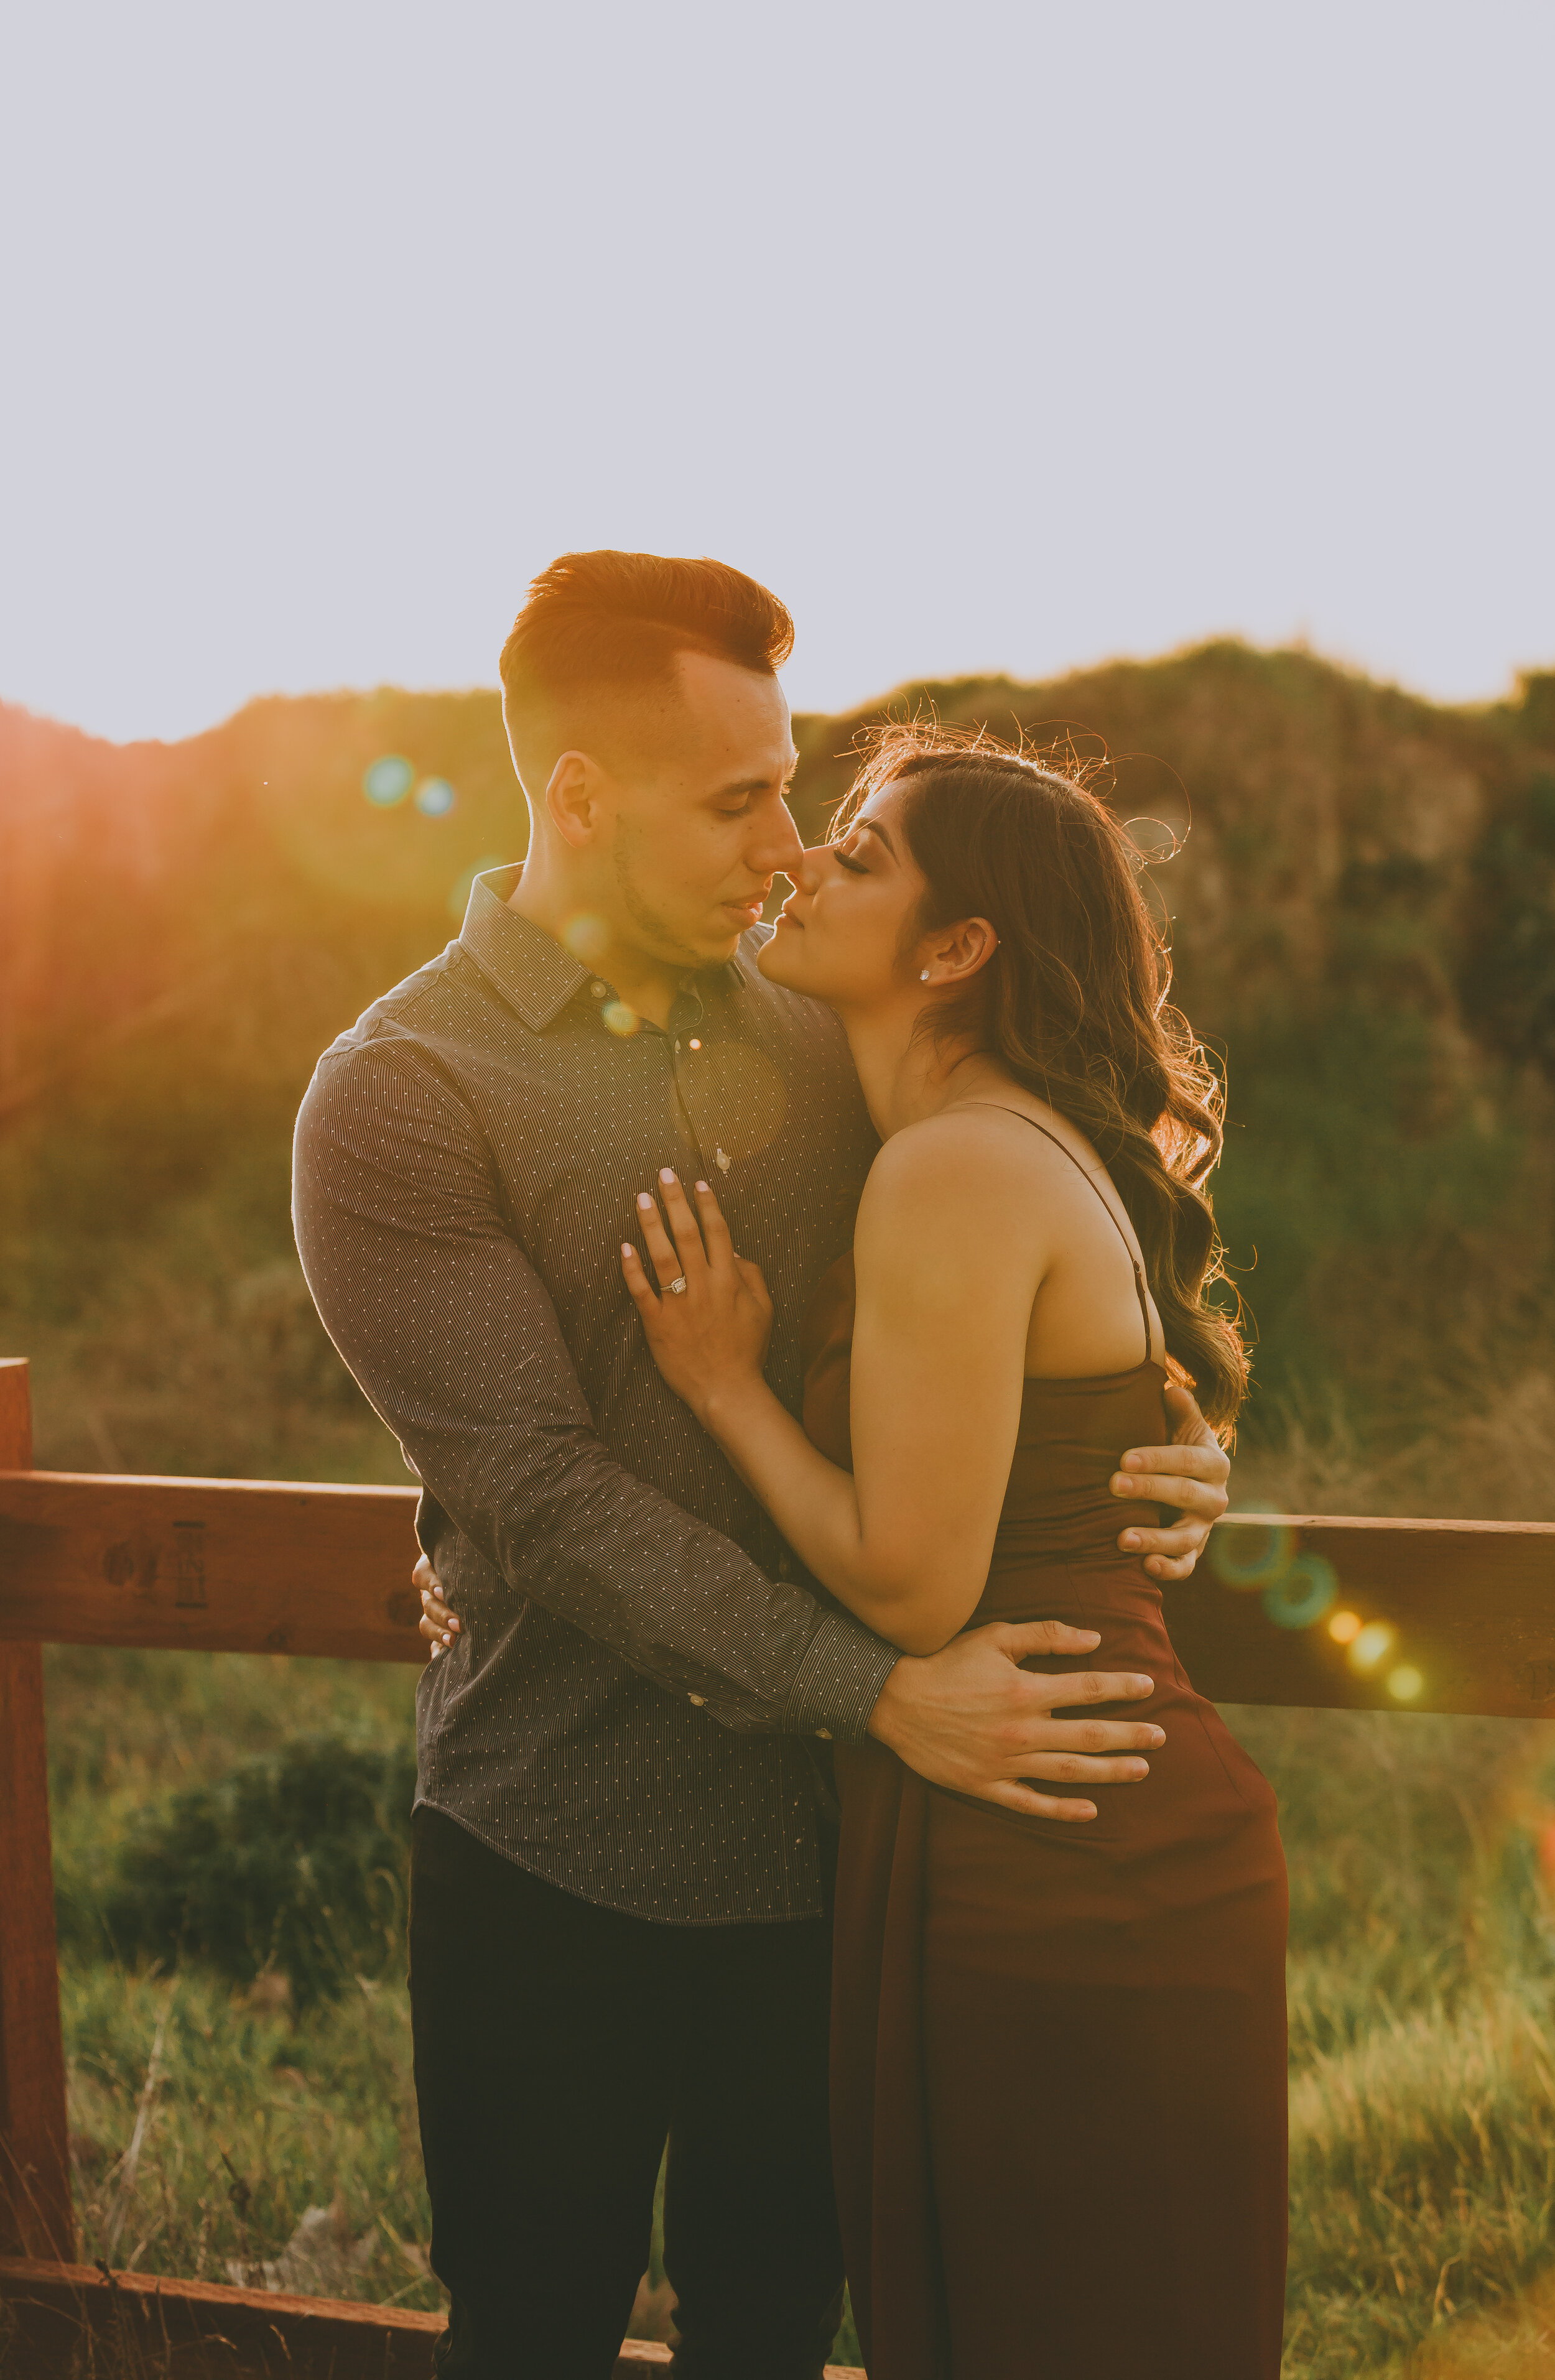 Fresno Engagament Photos - The Clausen Gallery - Samantha and Jesus-34.jpg